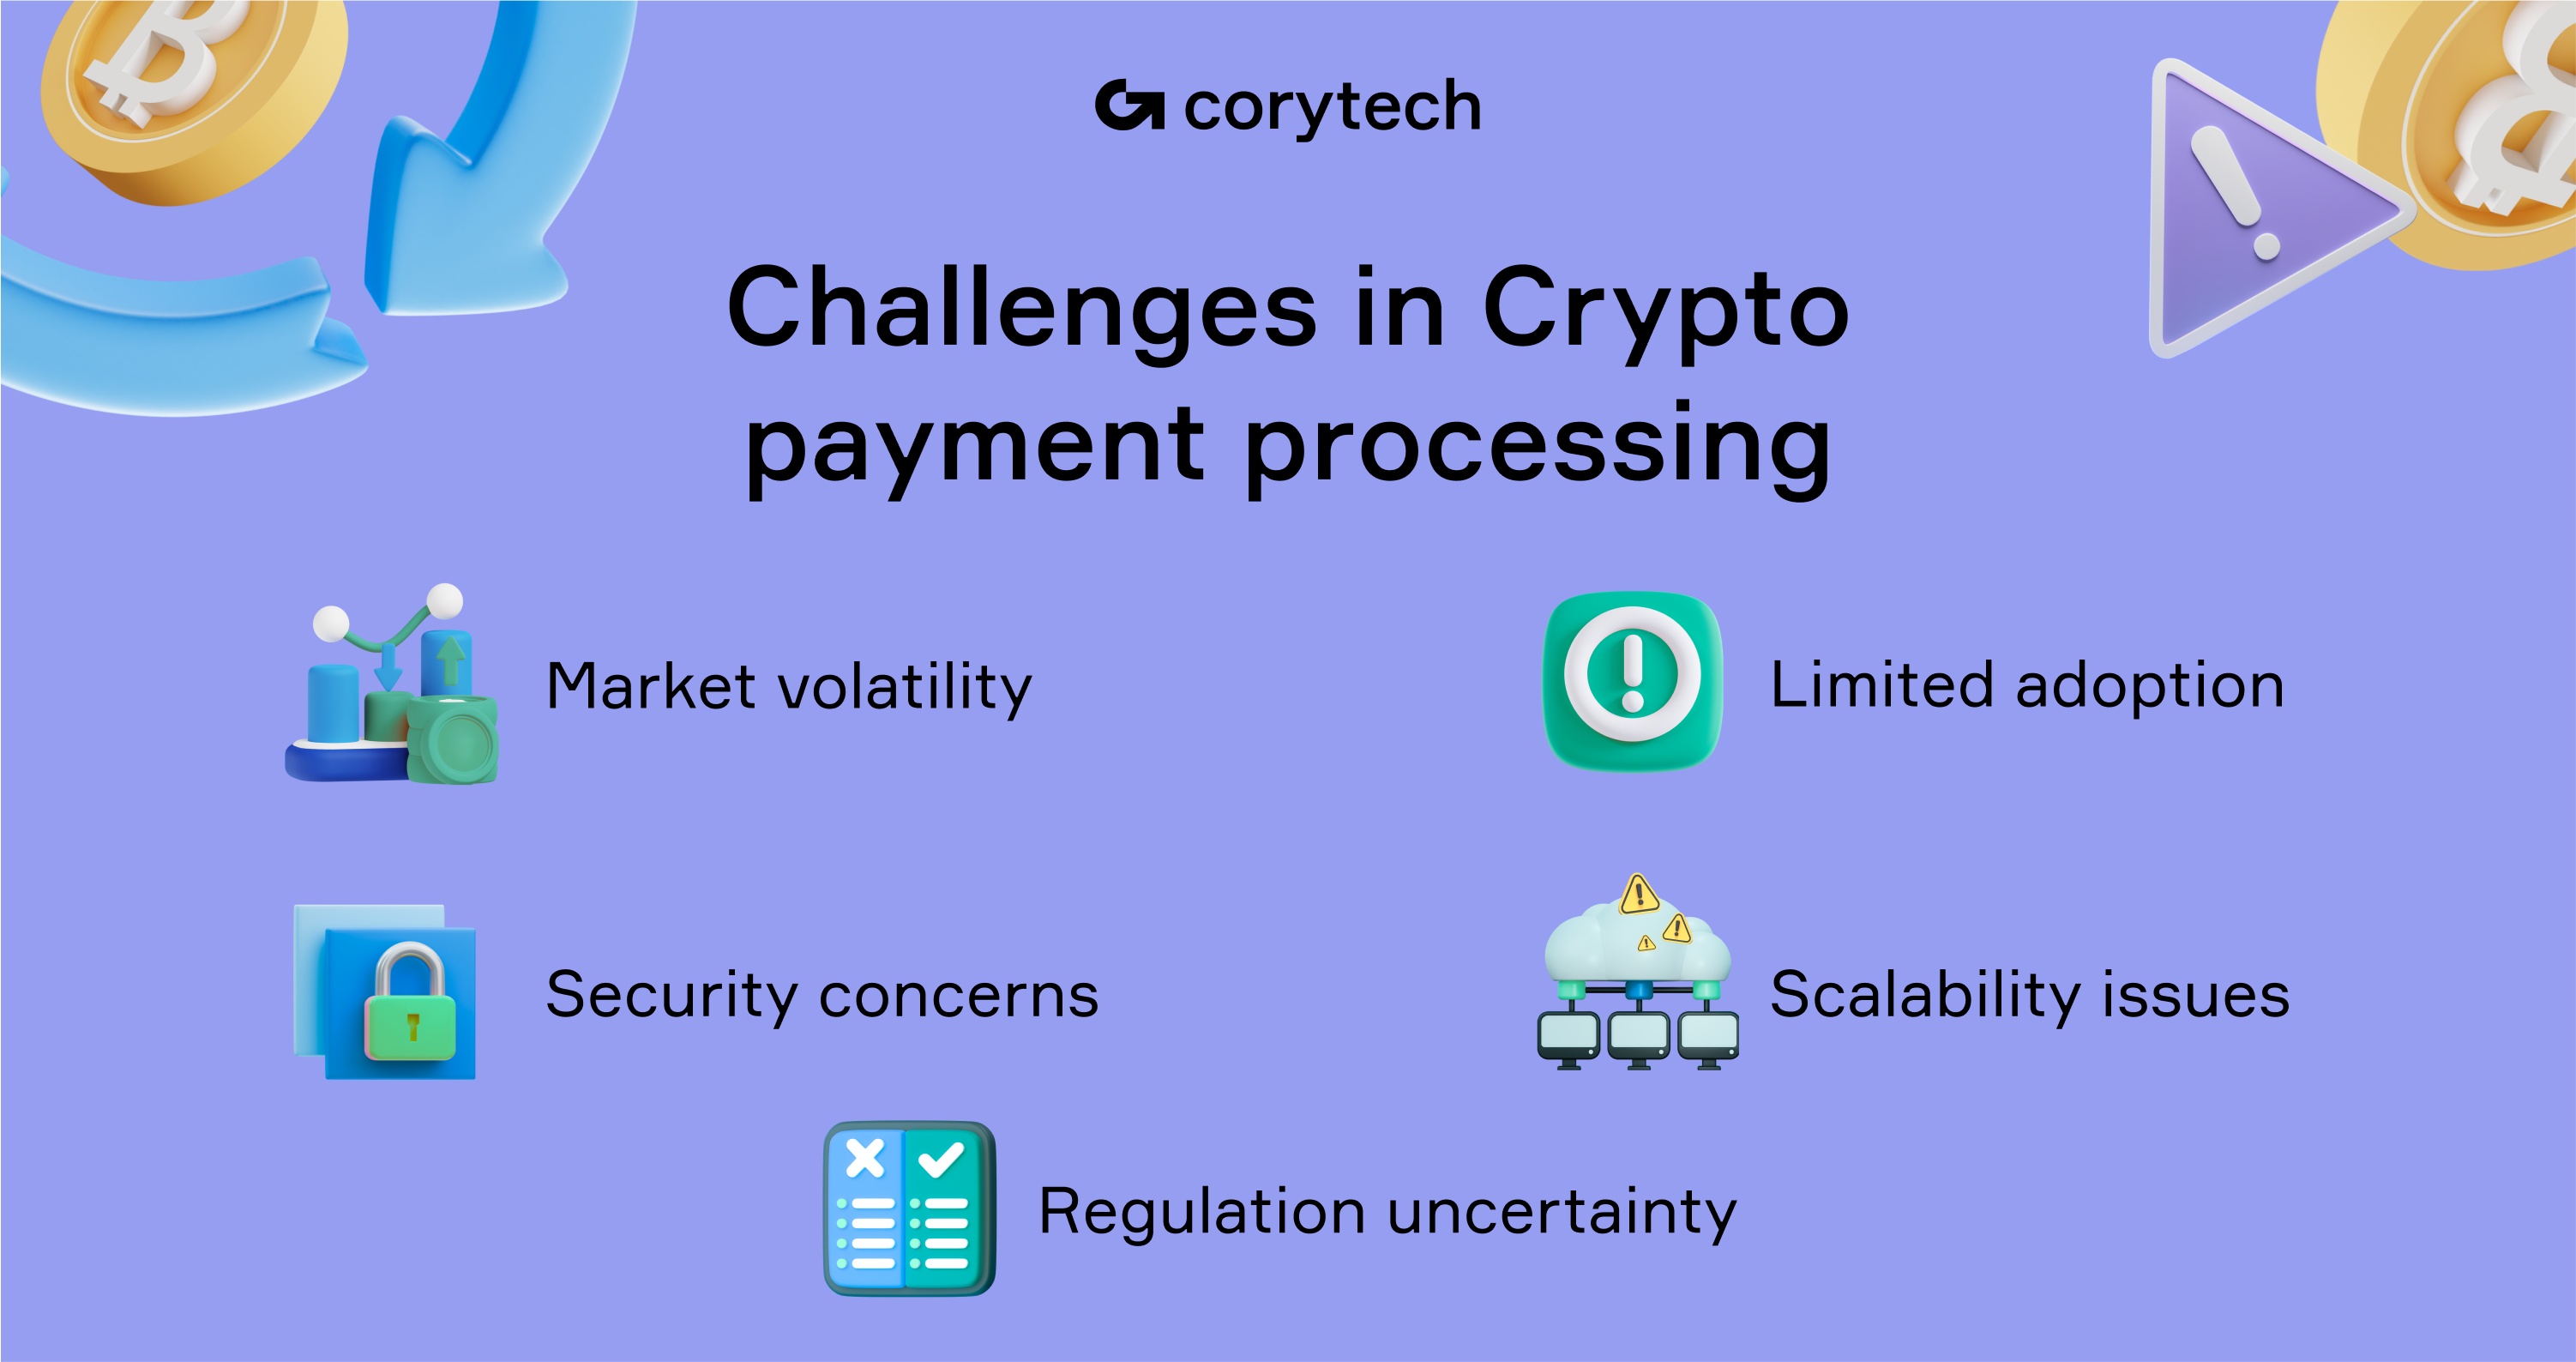 Challenges in crypto payment processing